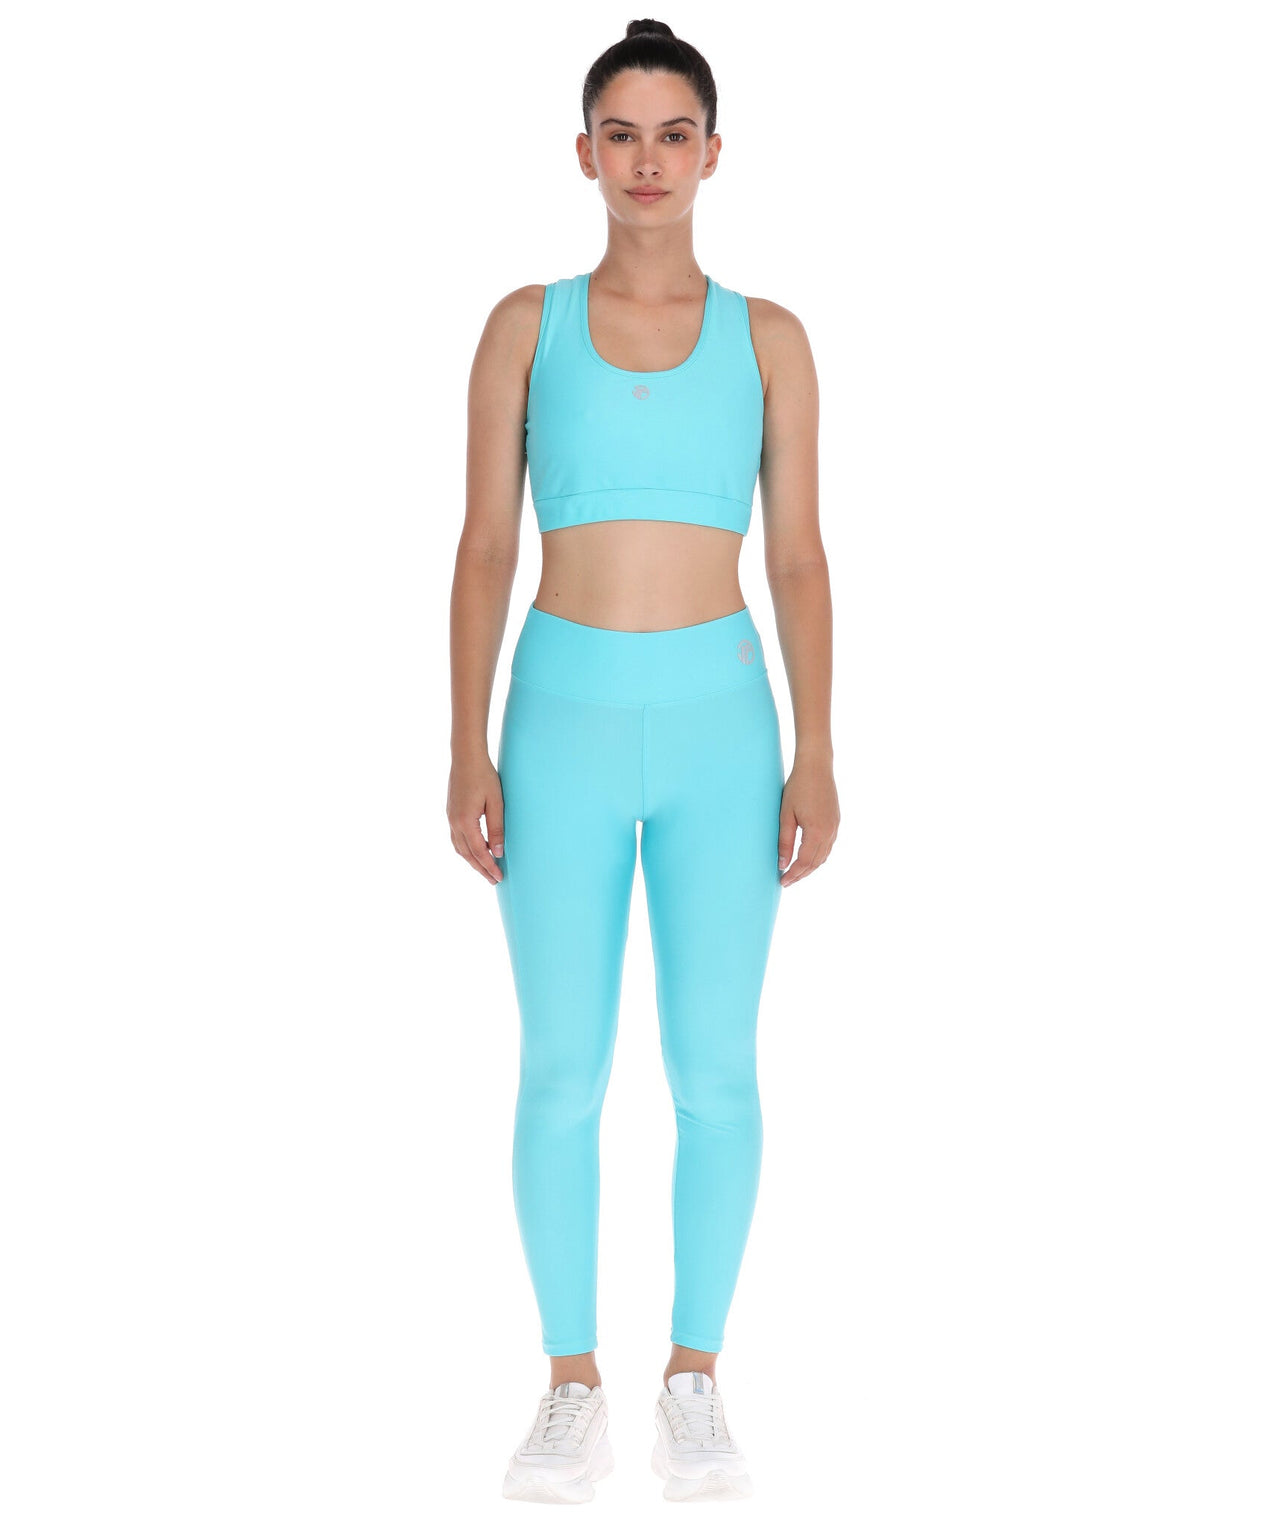 Top Deportivo Mujer Azul Cielo Liso - TFIT - TFIT